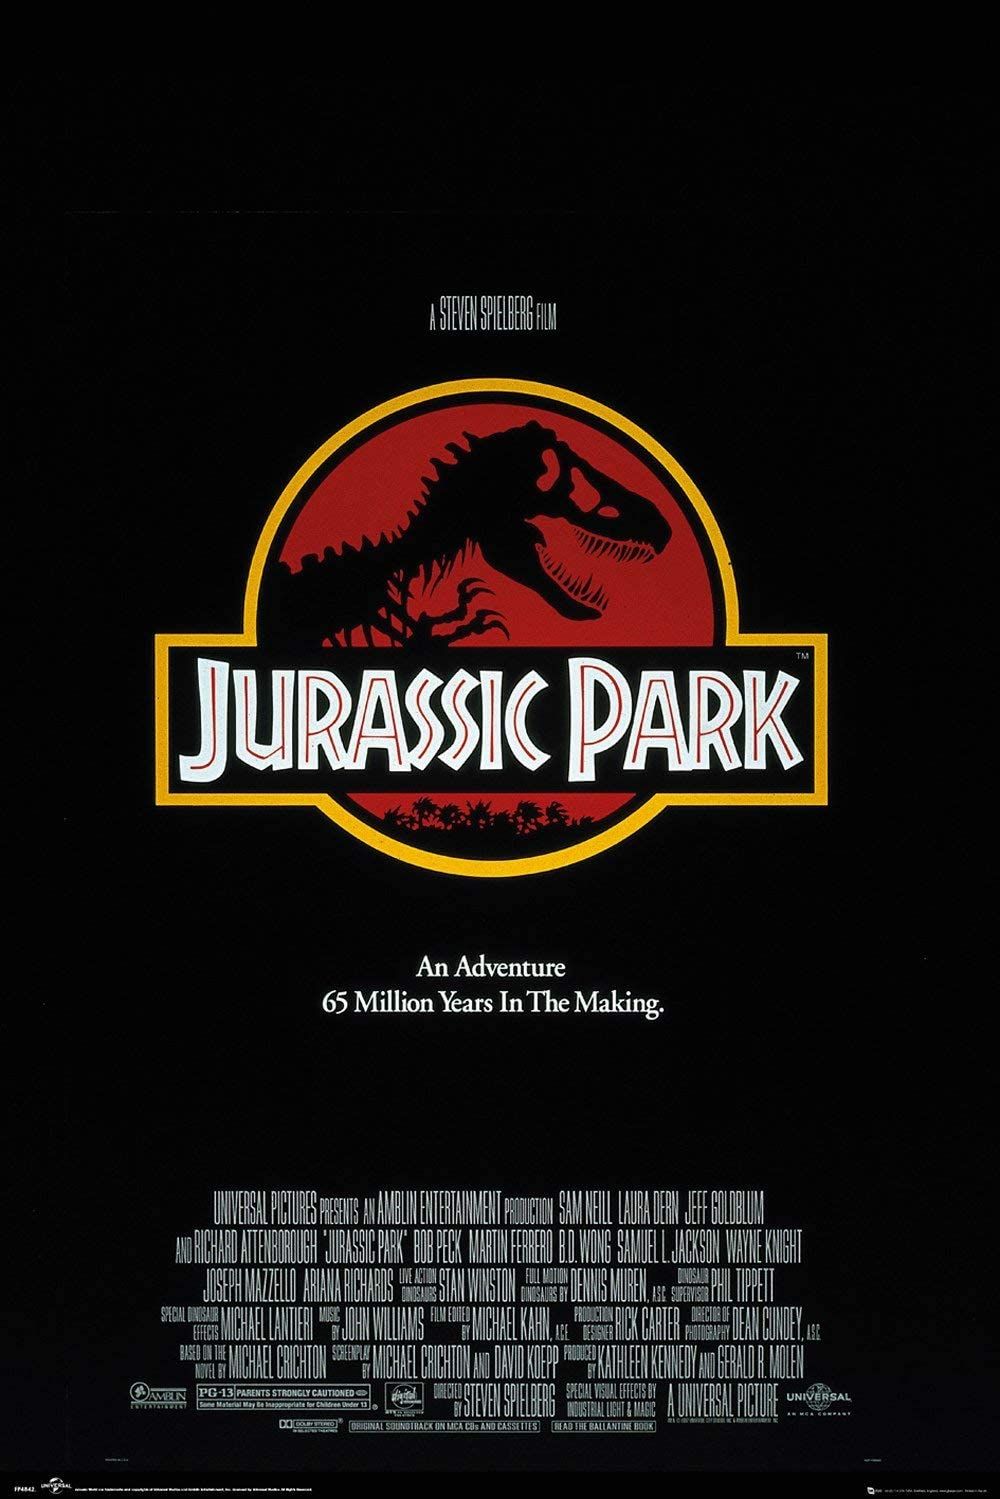 Jurassic Park movie poster with simple black background